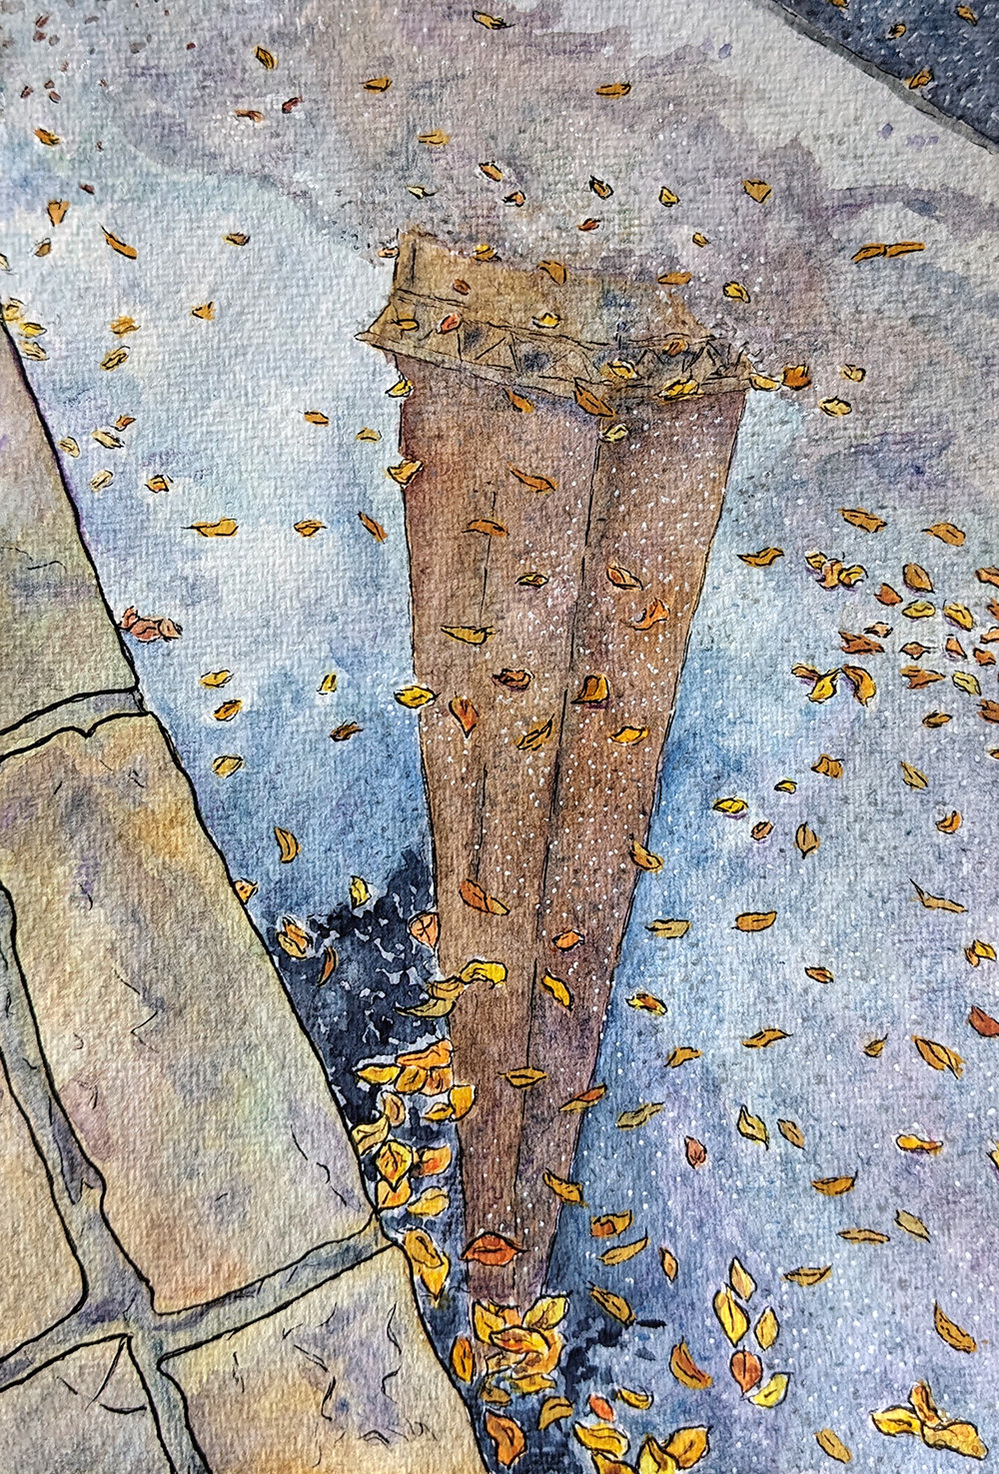 Painting of a sandstone spire reflected in a puddle on the side of a road, with a visible pavement. Gold leaves float on the water.